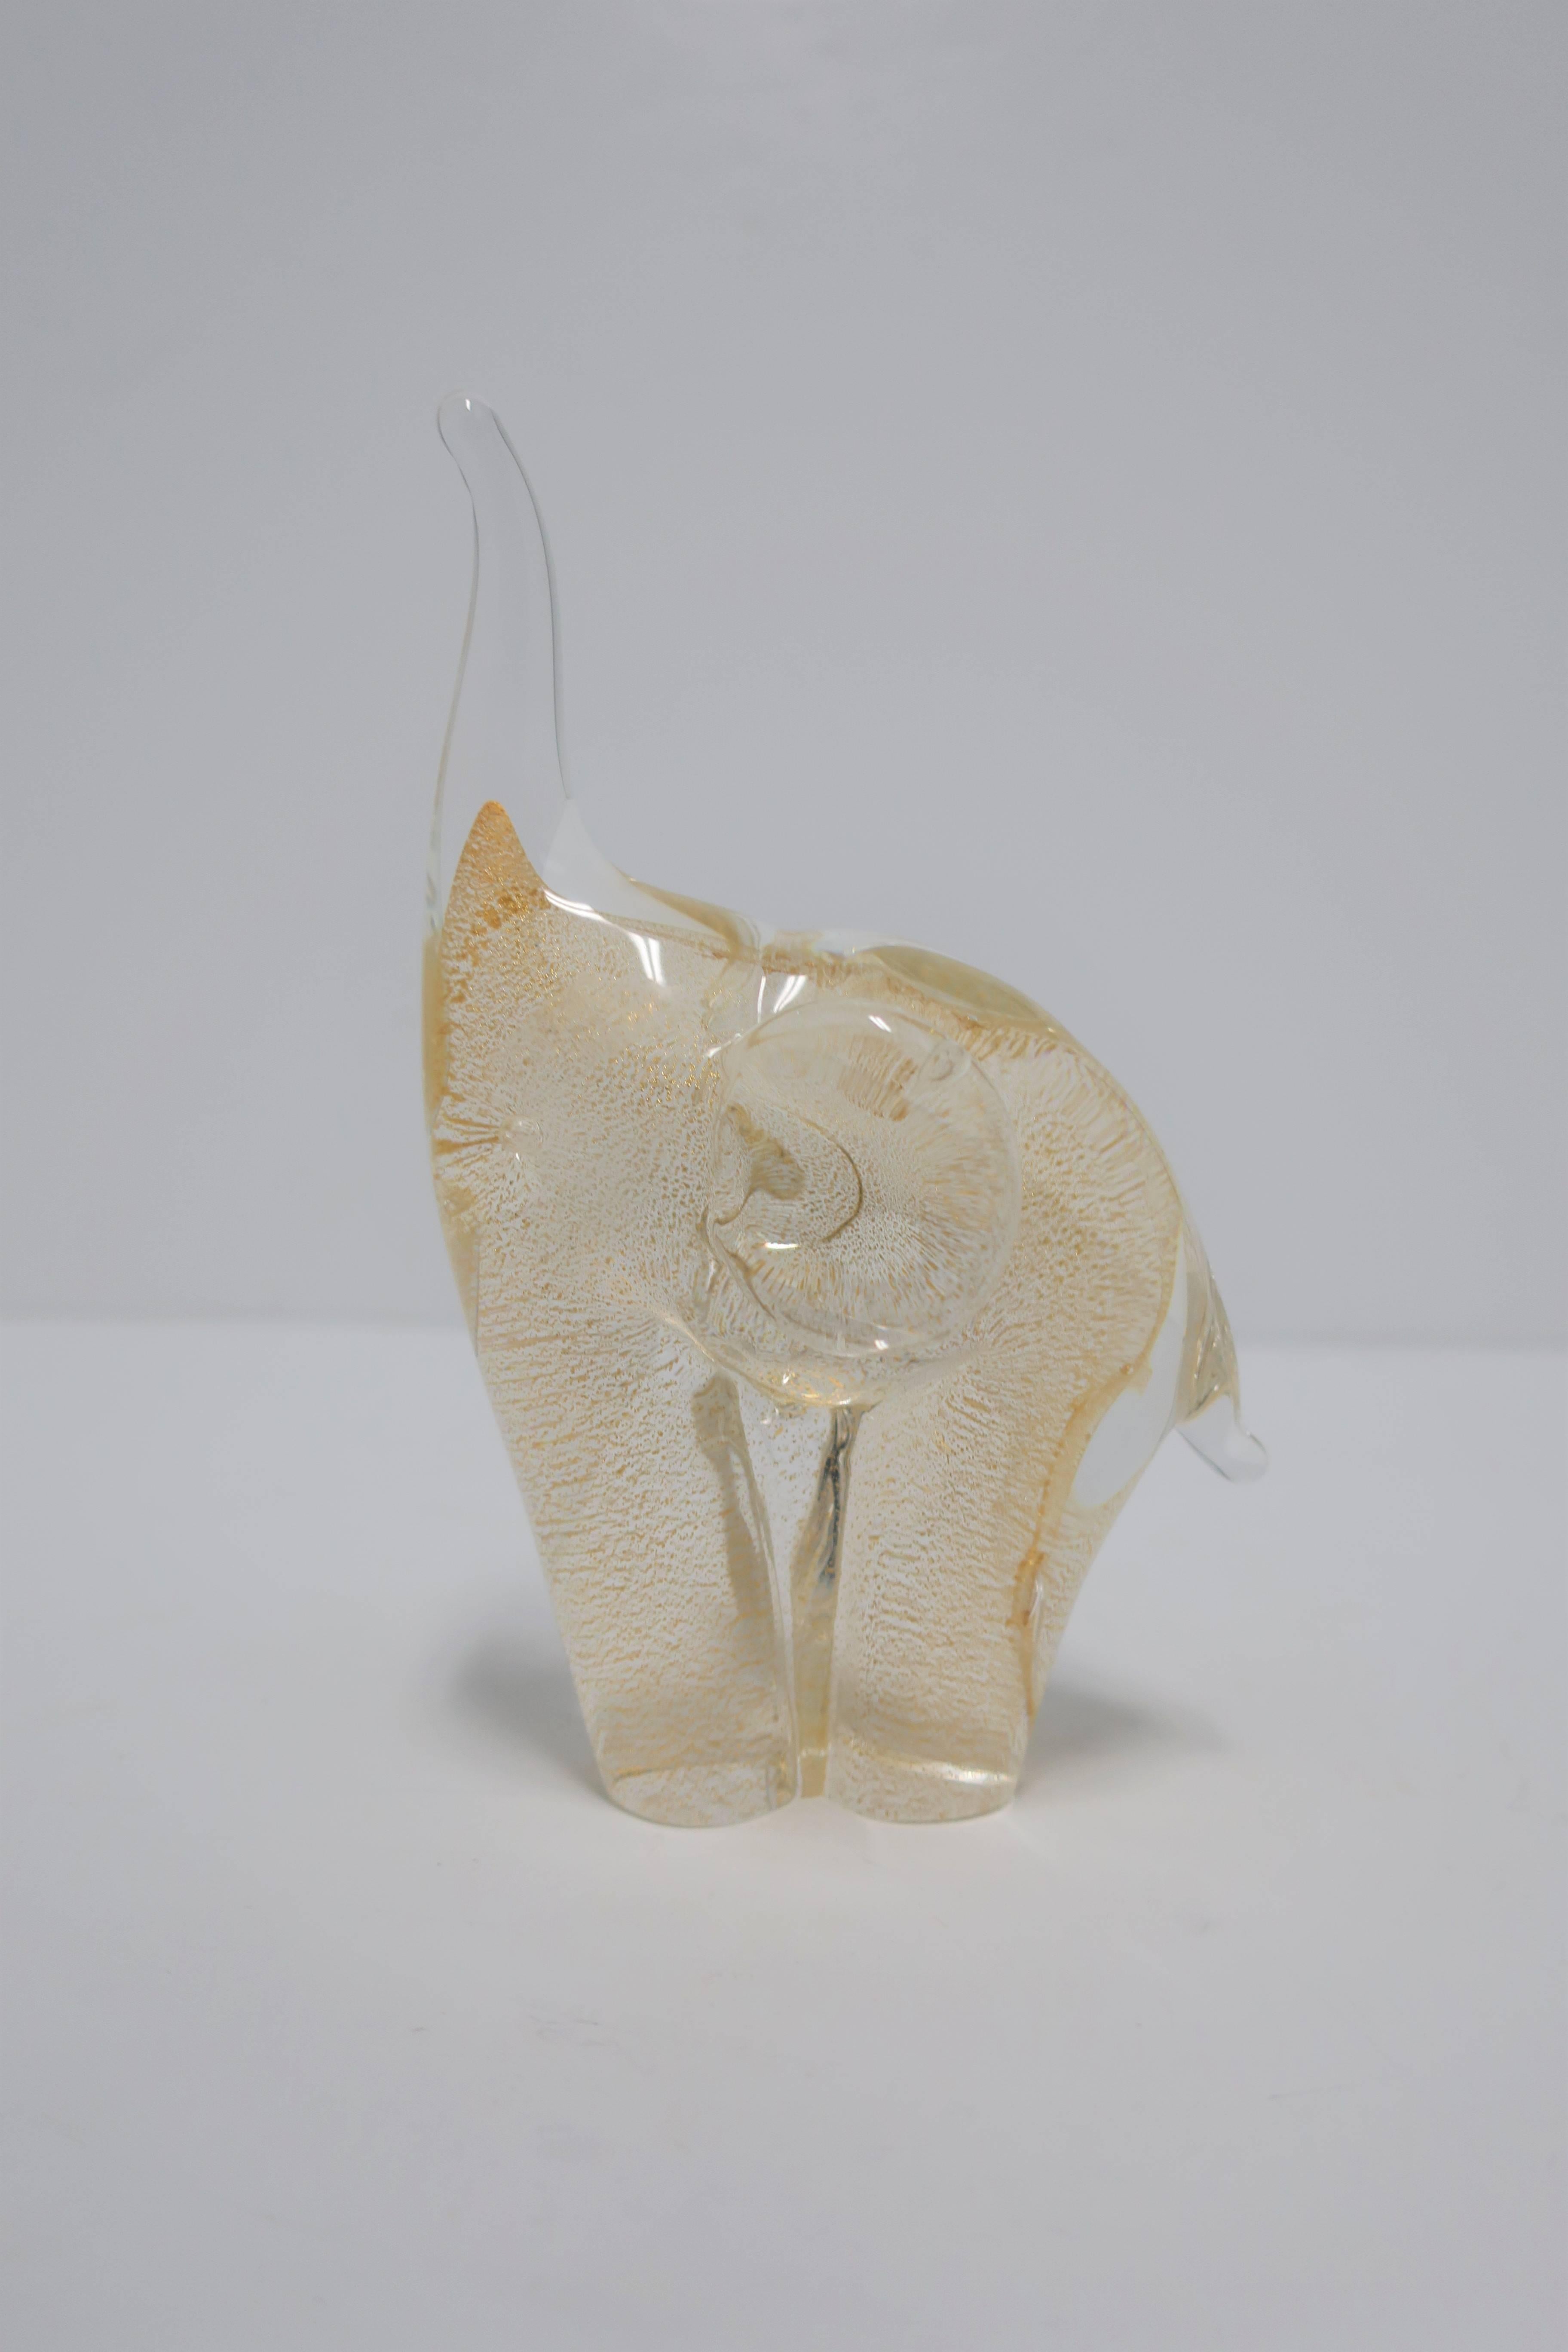 A beautiful clear with gold art-glass Elephant sculpture. This clear and gold art-glass elephant is in the style of Italian designers Franco Albini or Archimede Seguso.

Elephant measures: 6 in. H. x 4 in. x 3 in. W. 

